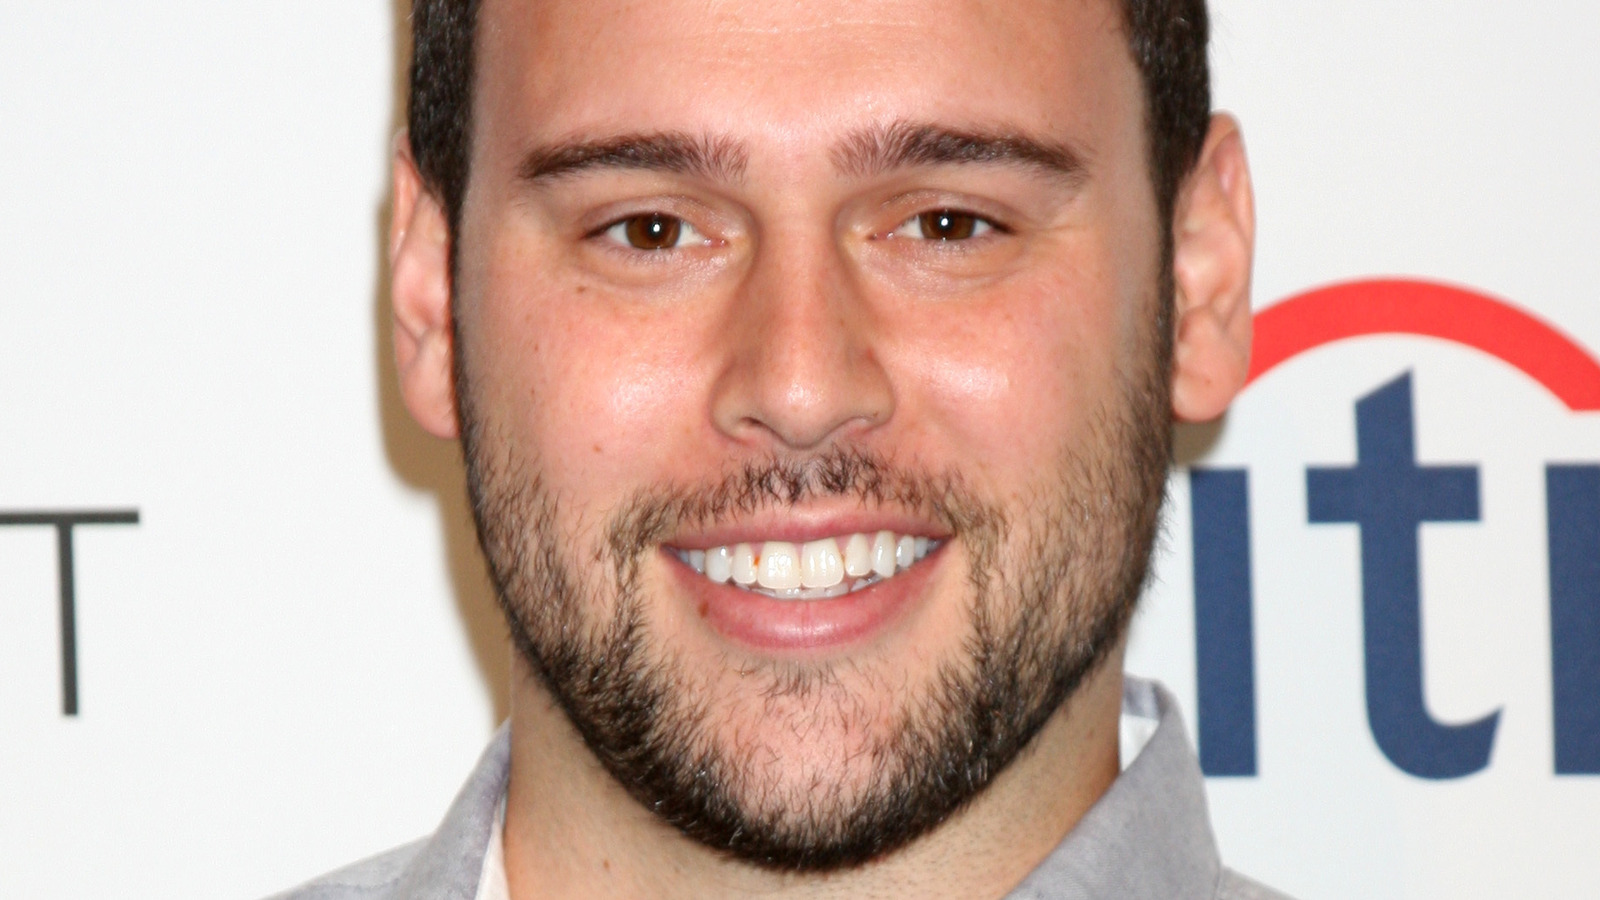 Details Spilled About Scooter Braun And Yael Cohen’s Divorce Agreement